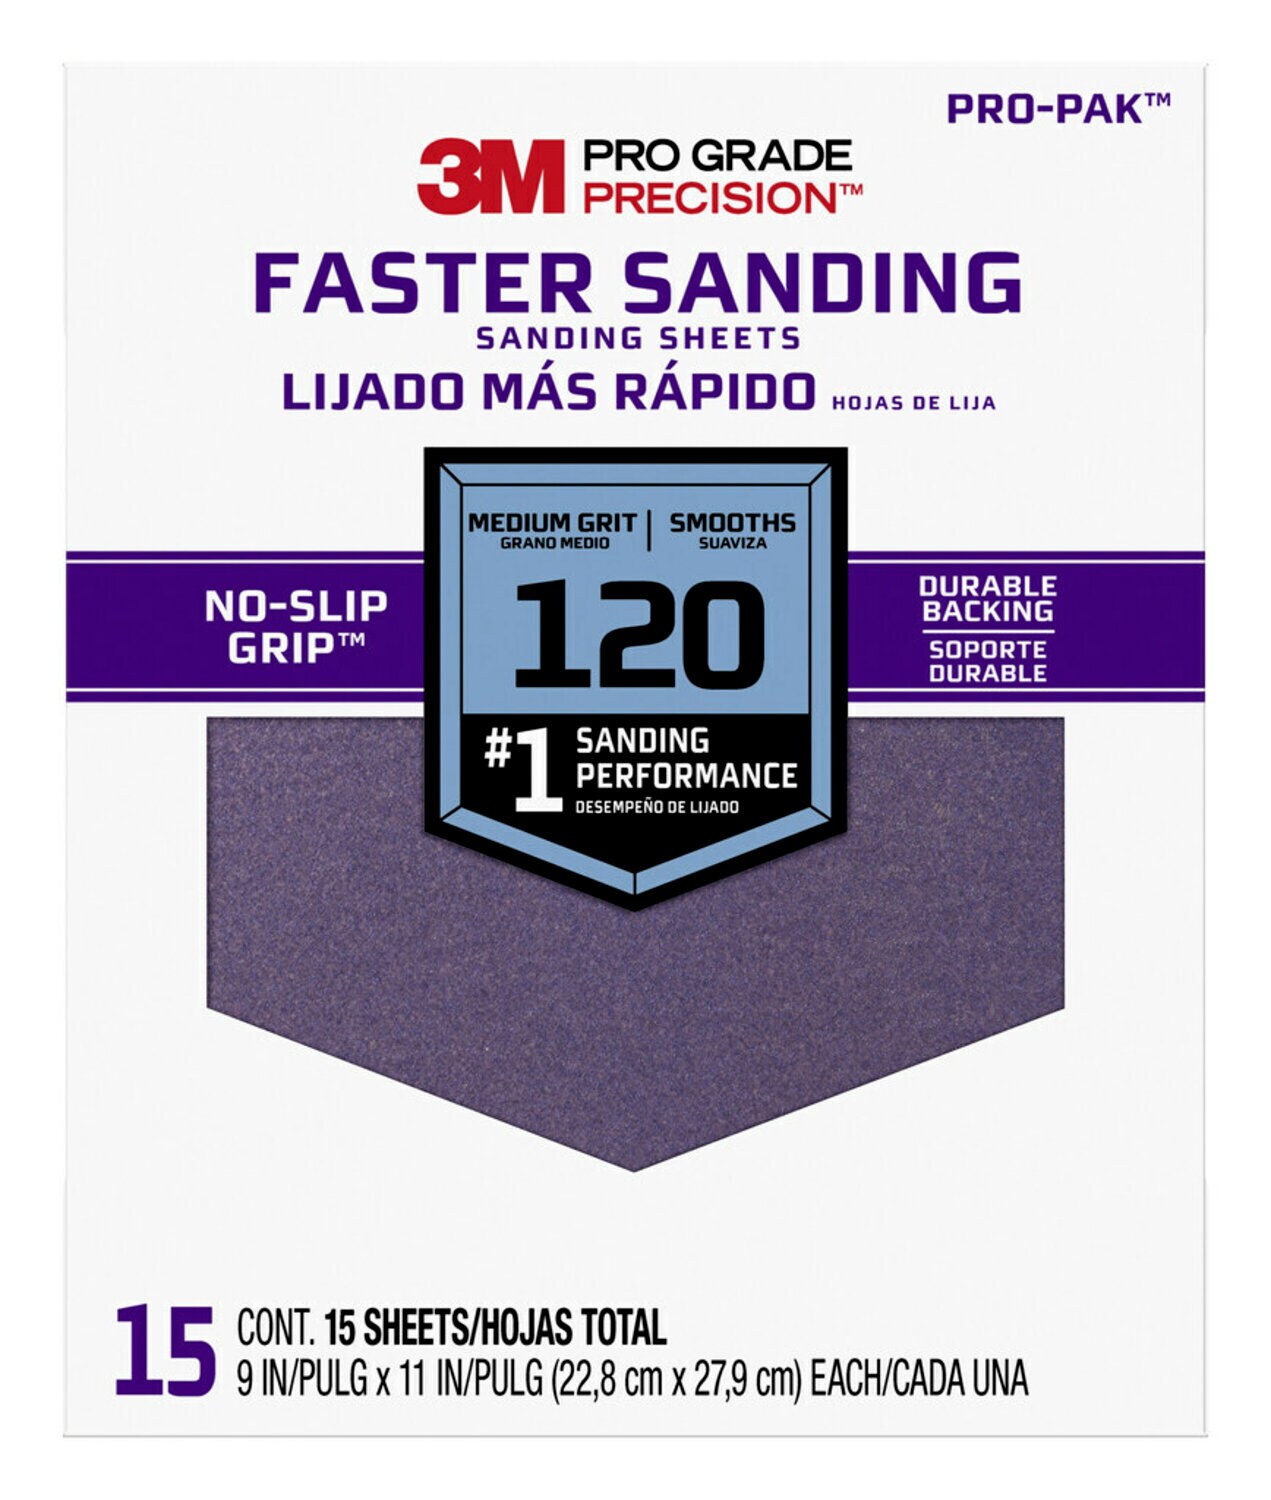 7100227530 - 3M Pro Grade Precision Faster Sanding Sanding Sheets 27120PGP-15, 9 in x 11 in, 120 grit, Medium, 15/pk